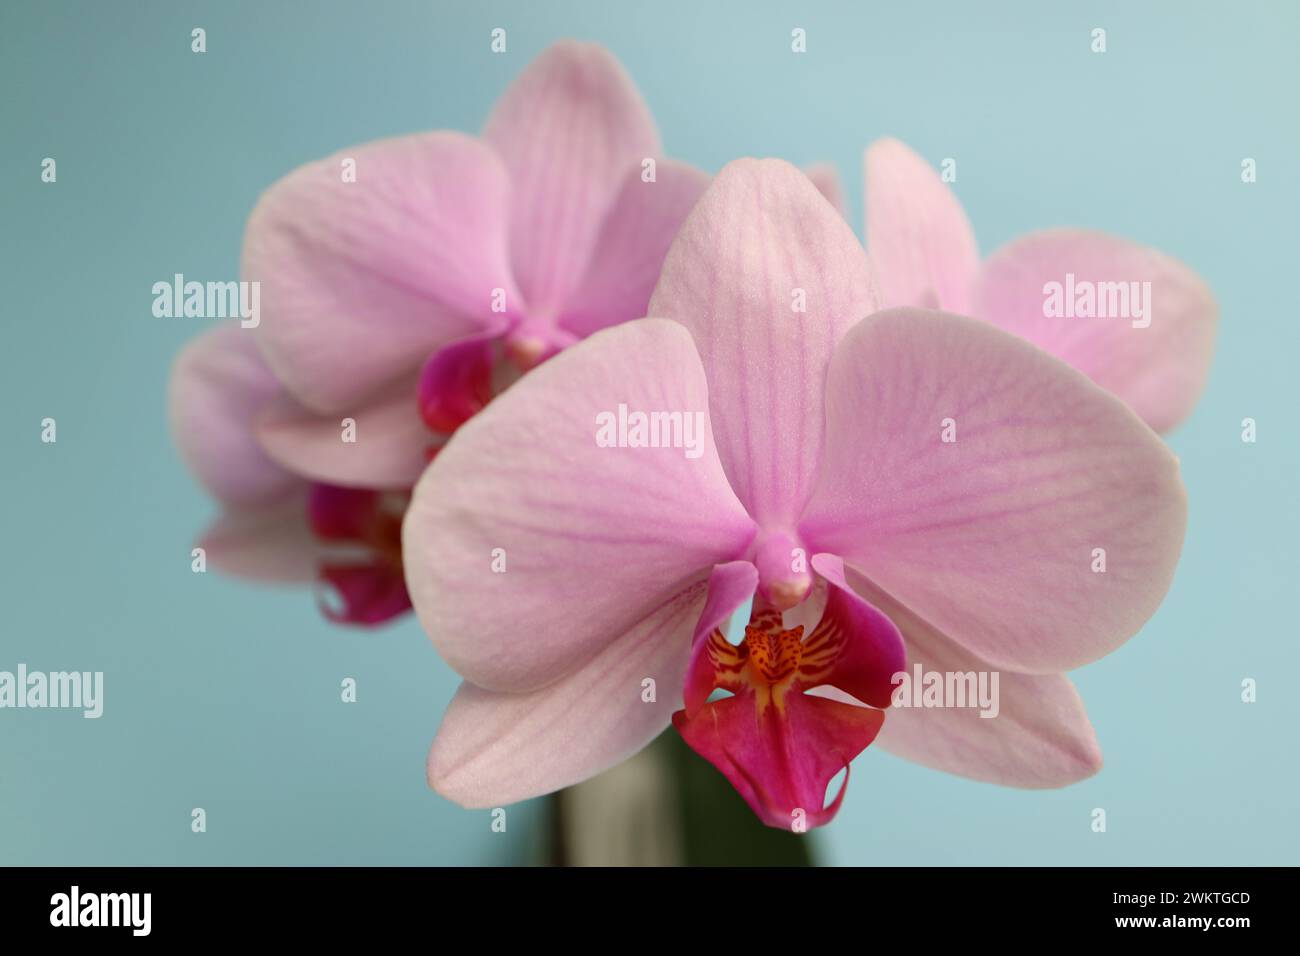 Pink Orchid with delicate petals on blue background, pink orchid with patterns macro, flower head, beauty in nature, exotic flower, floral photo Stock Photo